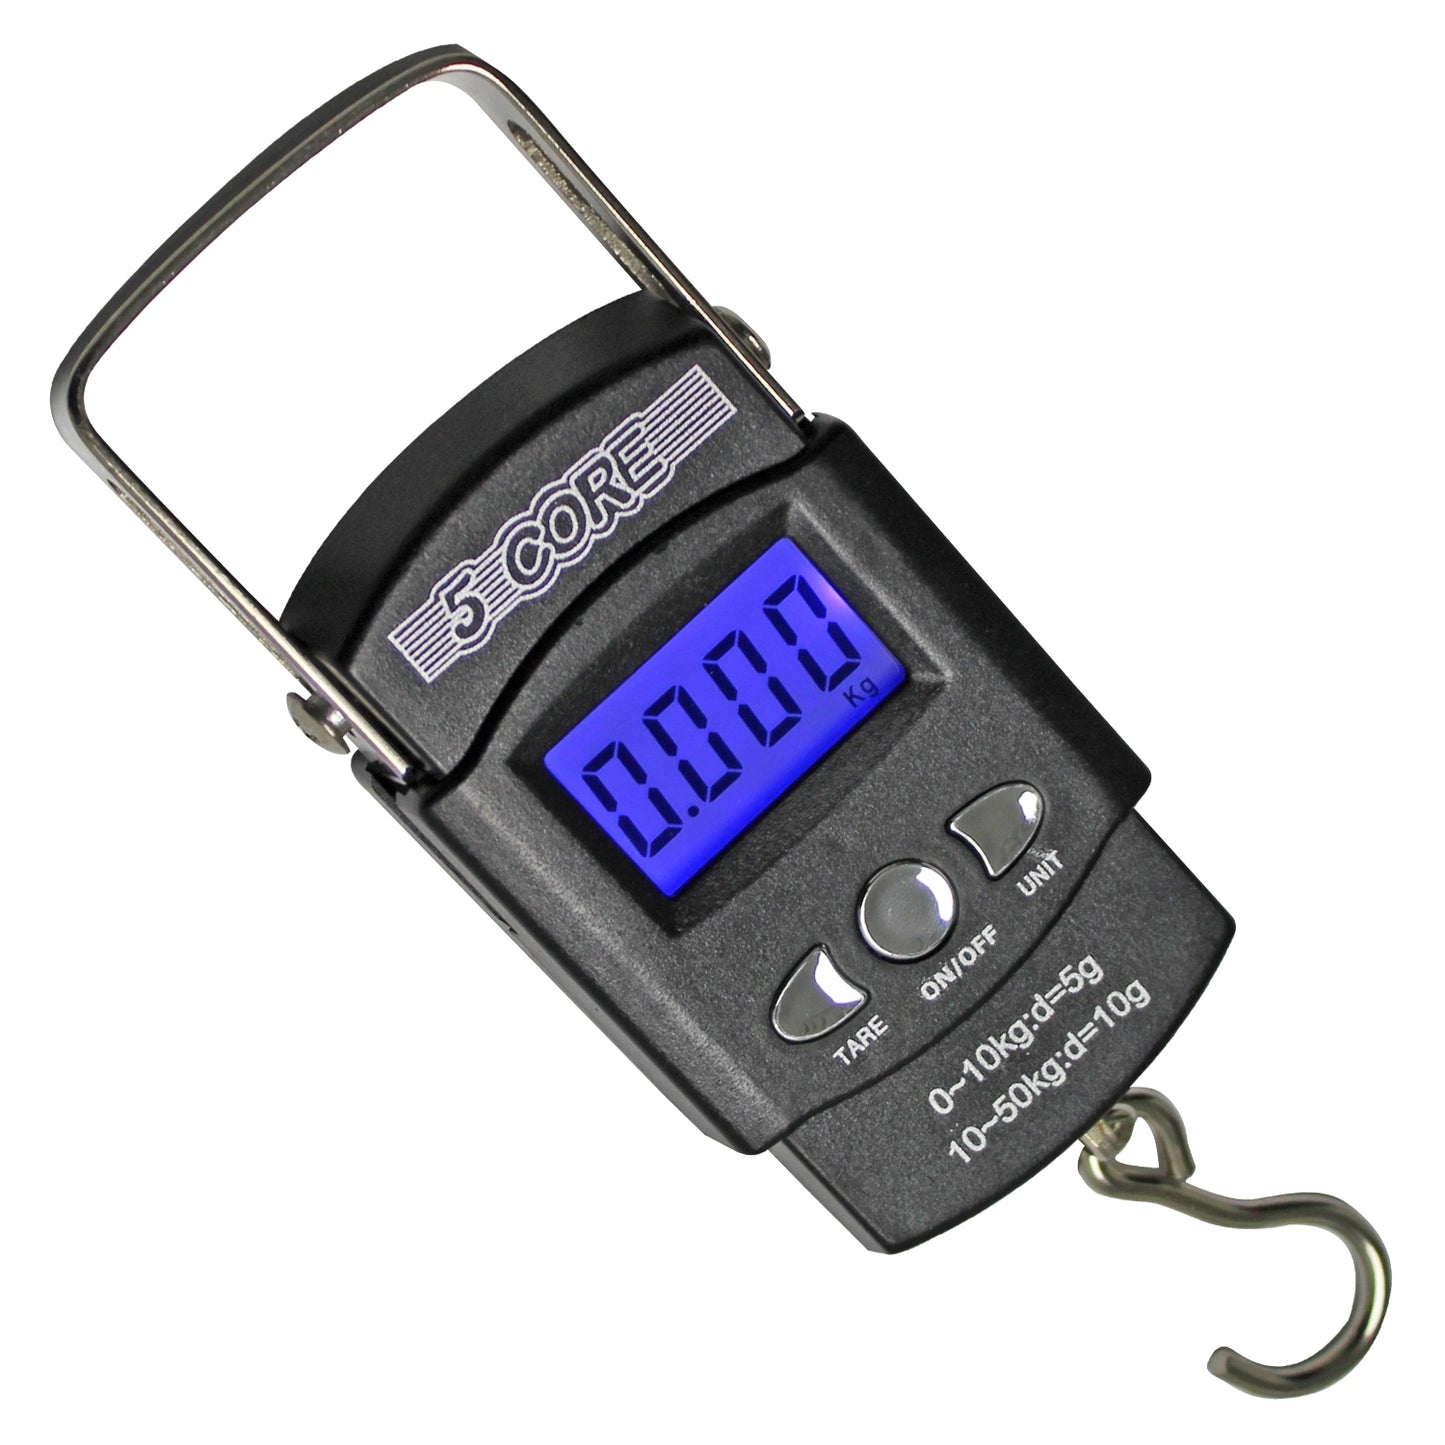 5 Core Digital Luggage & Fishing Scale: Your Best Travel Companion